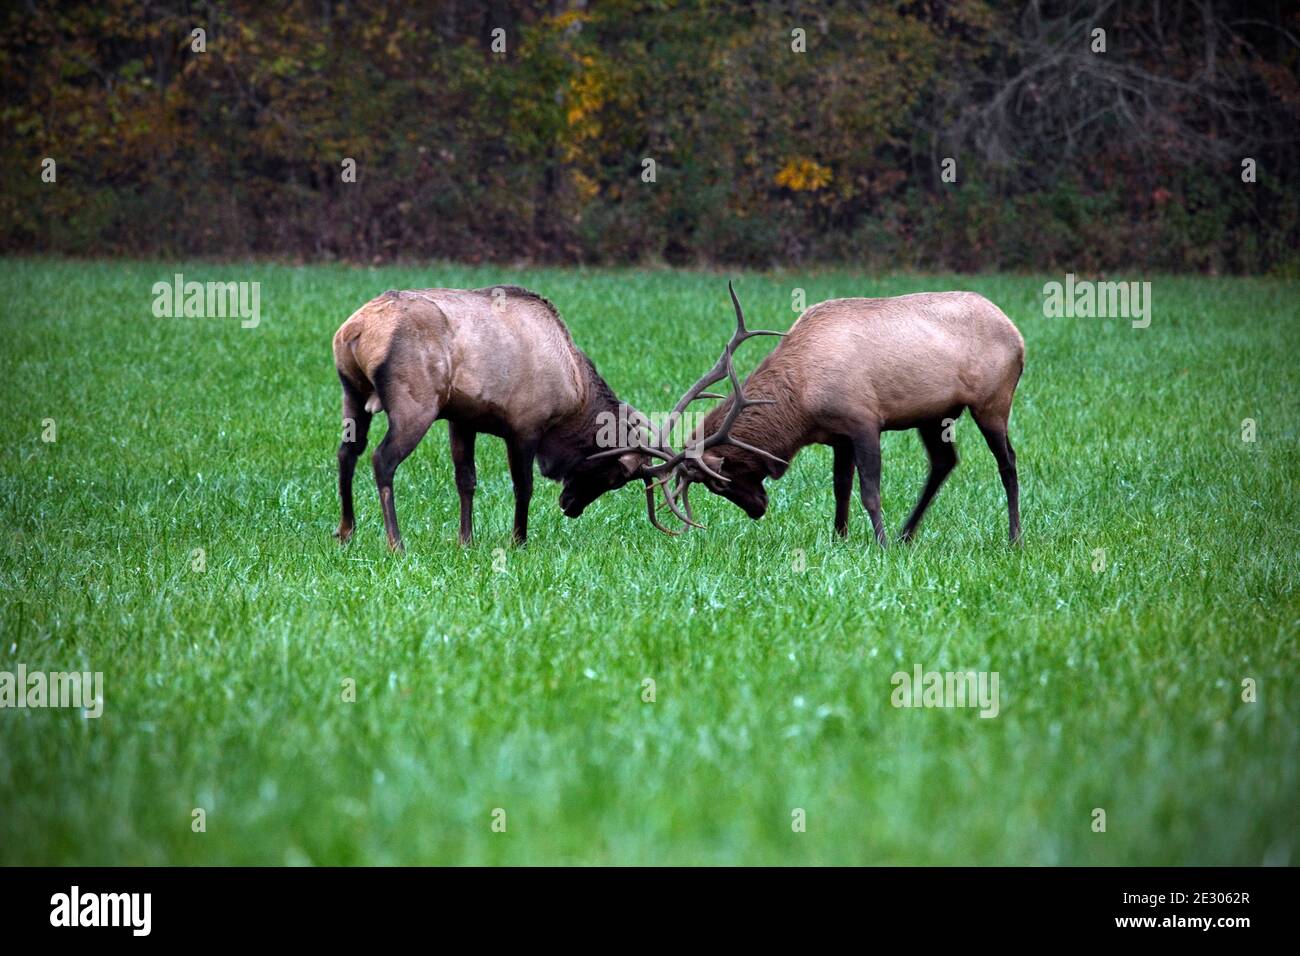 NC00221-00...NORTH CAROLINA - Two elk sparing near the Oconaluftee Visitors Center in Great Smoky Mountains National Park. Stock Photo